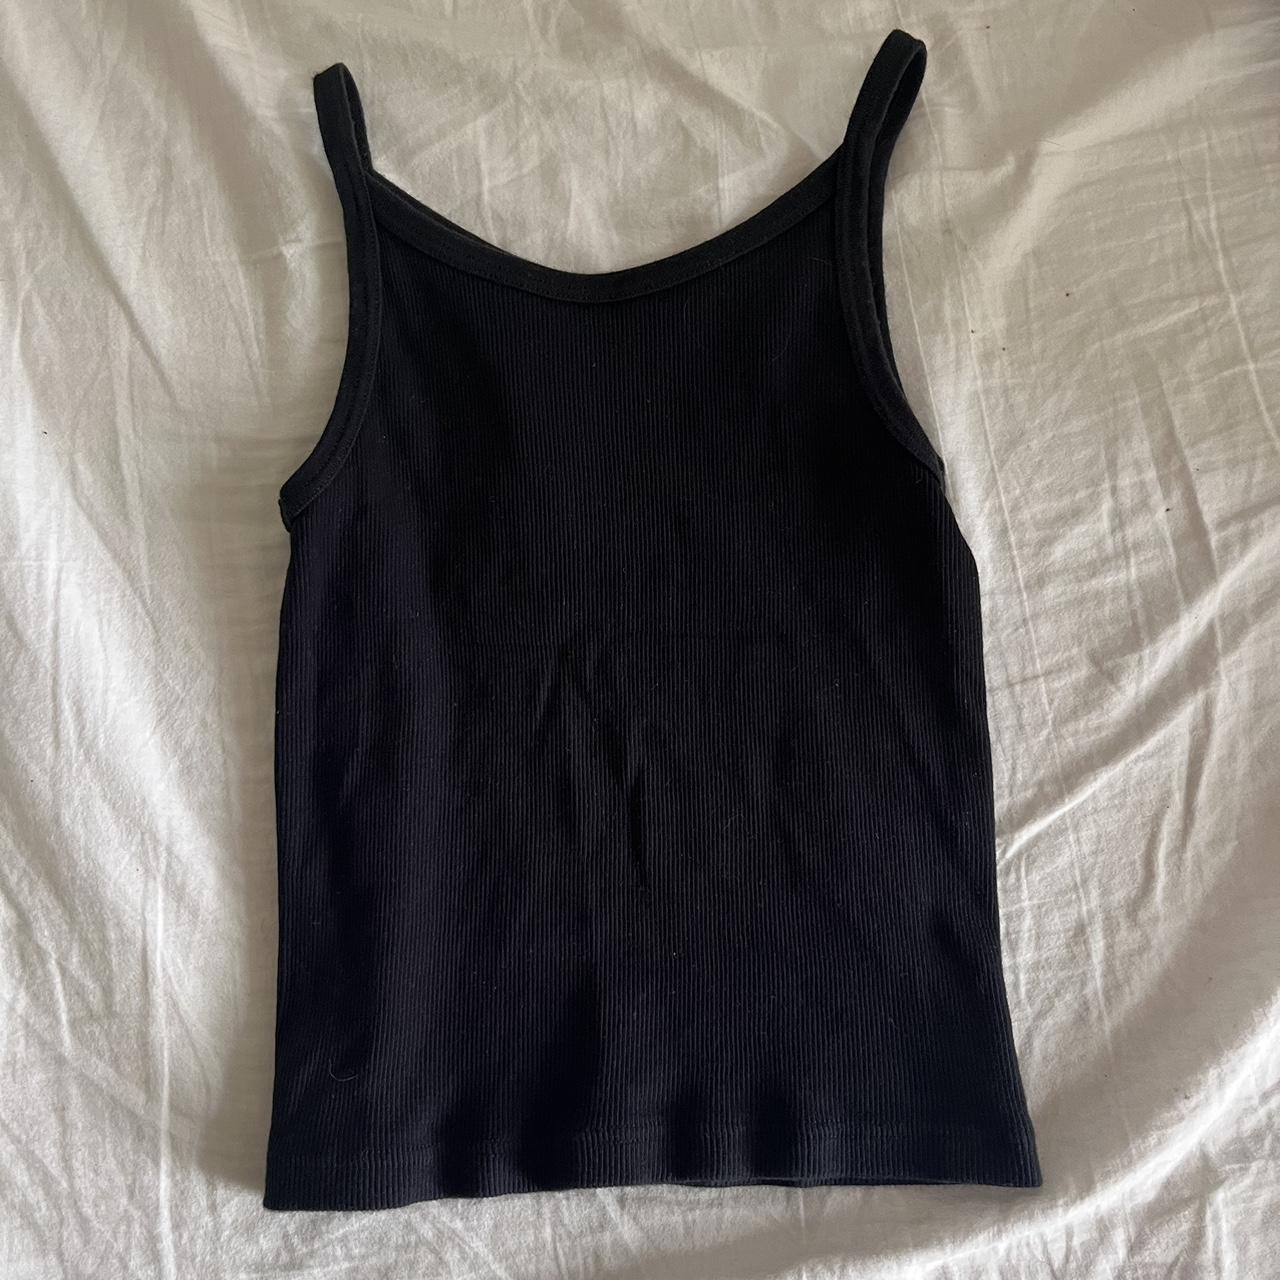 Brandy black tank -in perfect condition, I just... - Depop